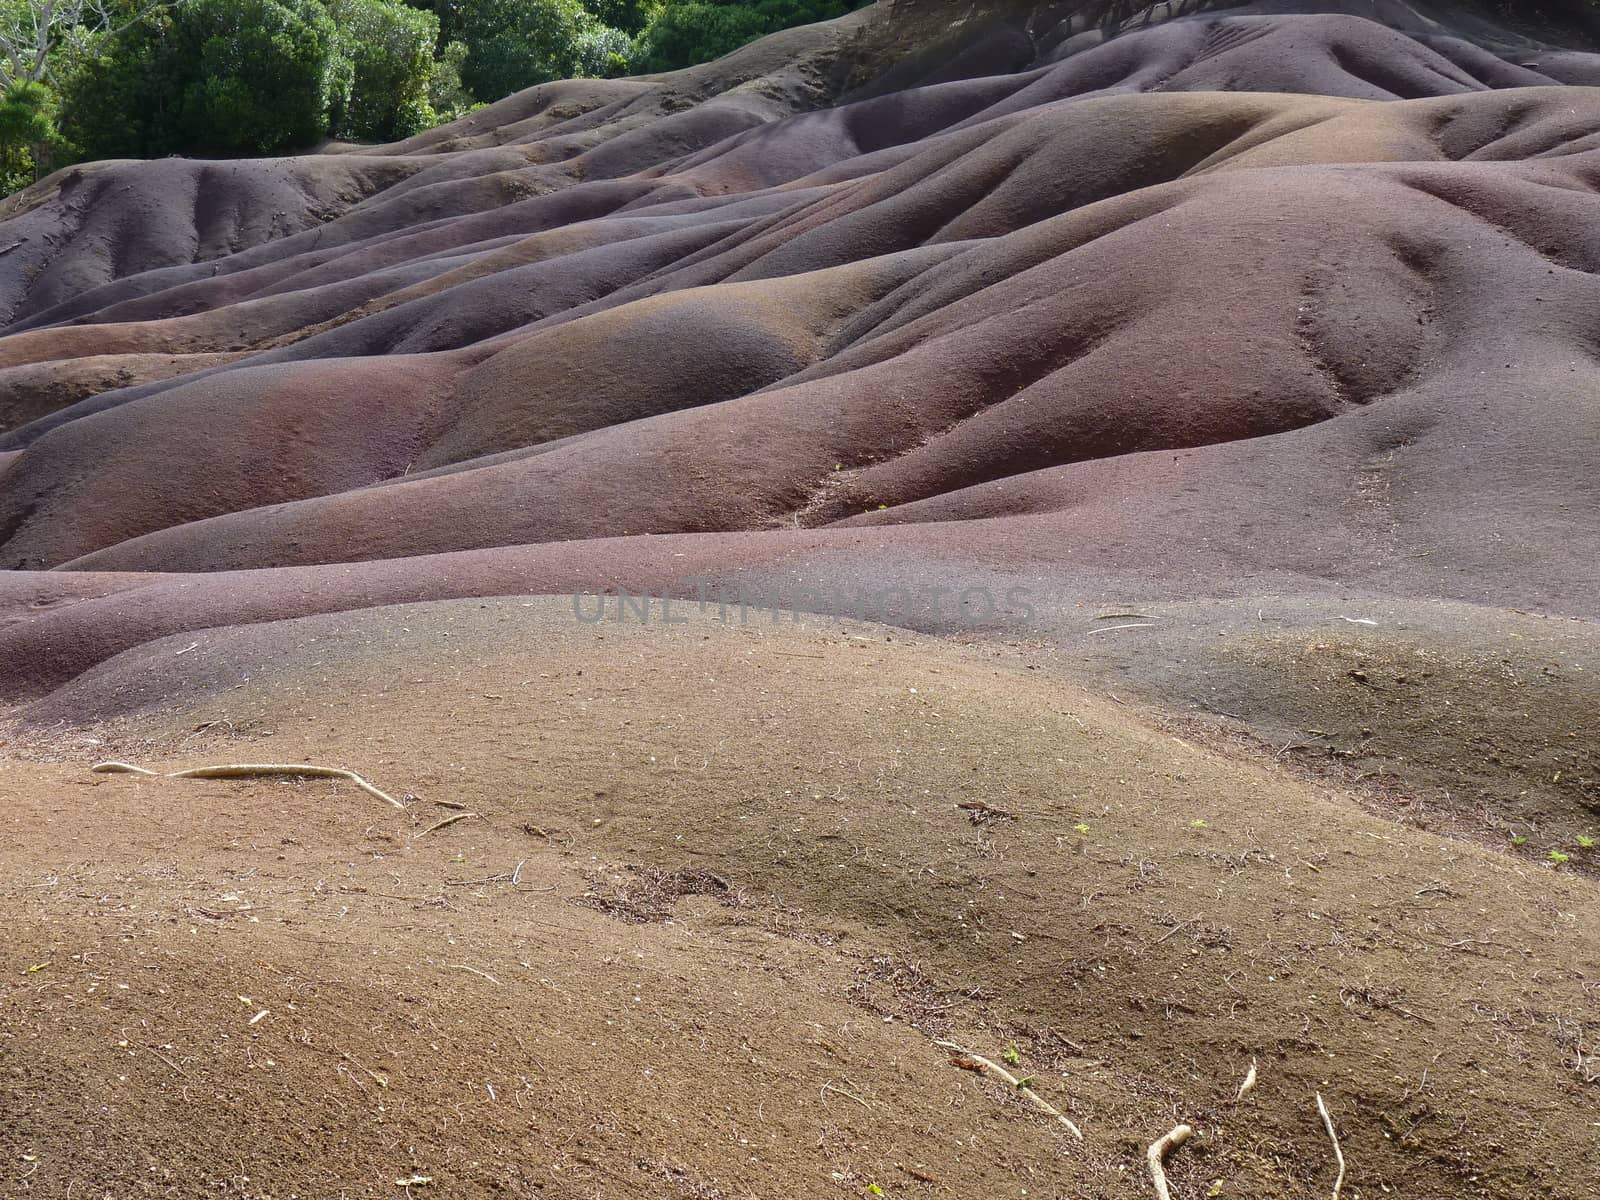 Chamarel Seven Coloured Earths by nicousnake